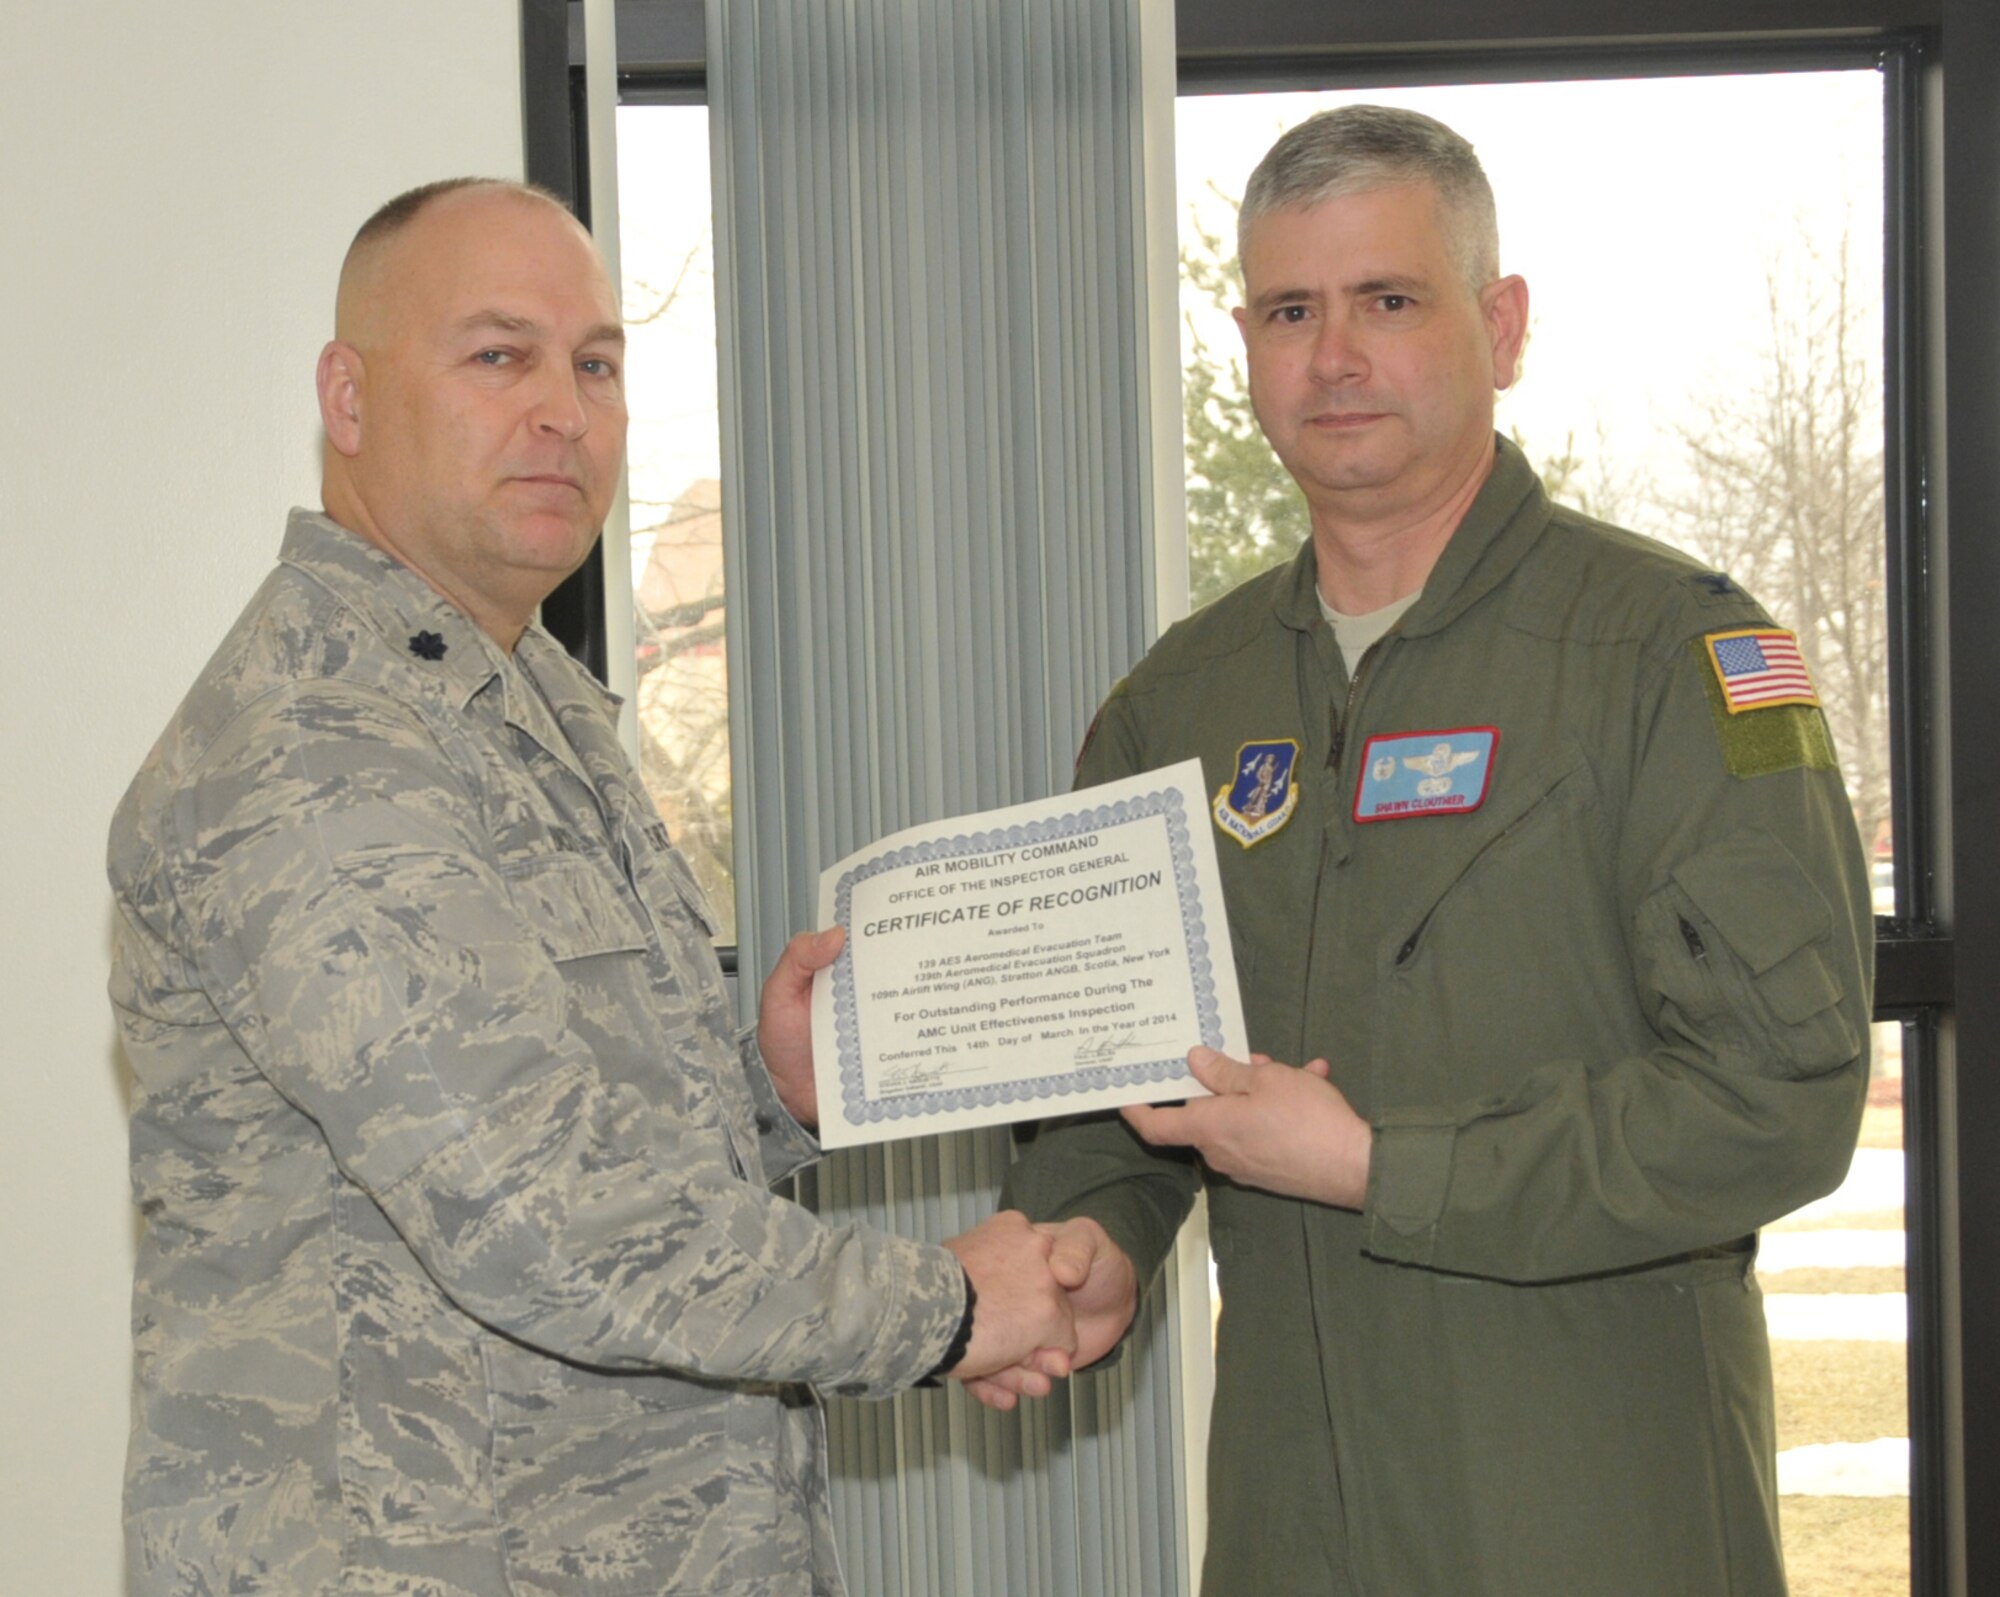 STRATTON AIR NATIONAL GUARD BASE, N.Y. -- Col. Shawn Clouthier (right), 109th Airlift Wing commander, presents Lt. Col. Brian Backus, 139th Aeromedical Evacuation Squadron commander, with a certificate of recognition March 25, 2014, from Air Mobility Command for outstanding performance during the 109th AW's recent Unit Effectiveness Inspection. The entire 139th AES Aeromedical Evacuation Team was recognized as an exceptional performer during the UEI. (Air National Guard photo by Master Sgt. William Gizara/Released)